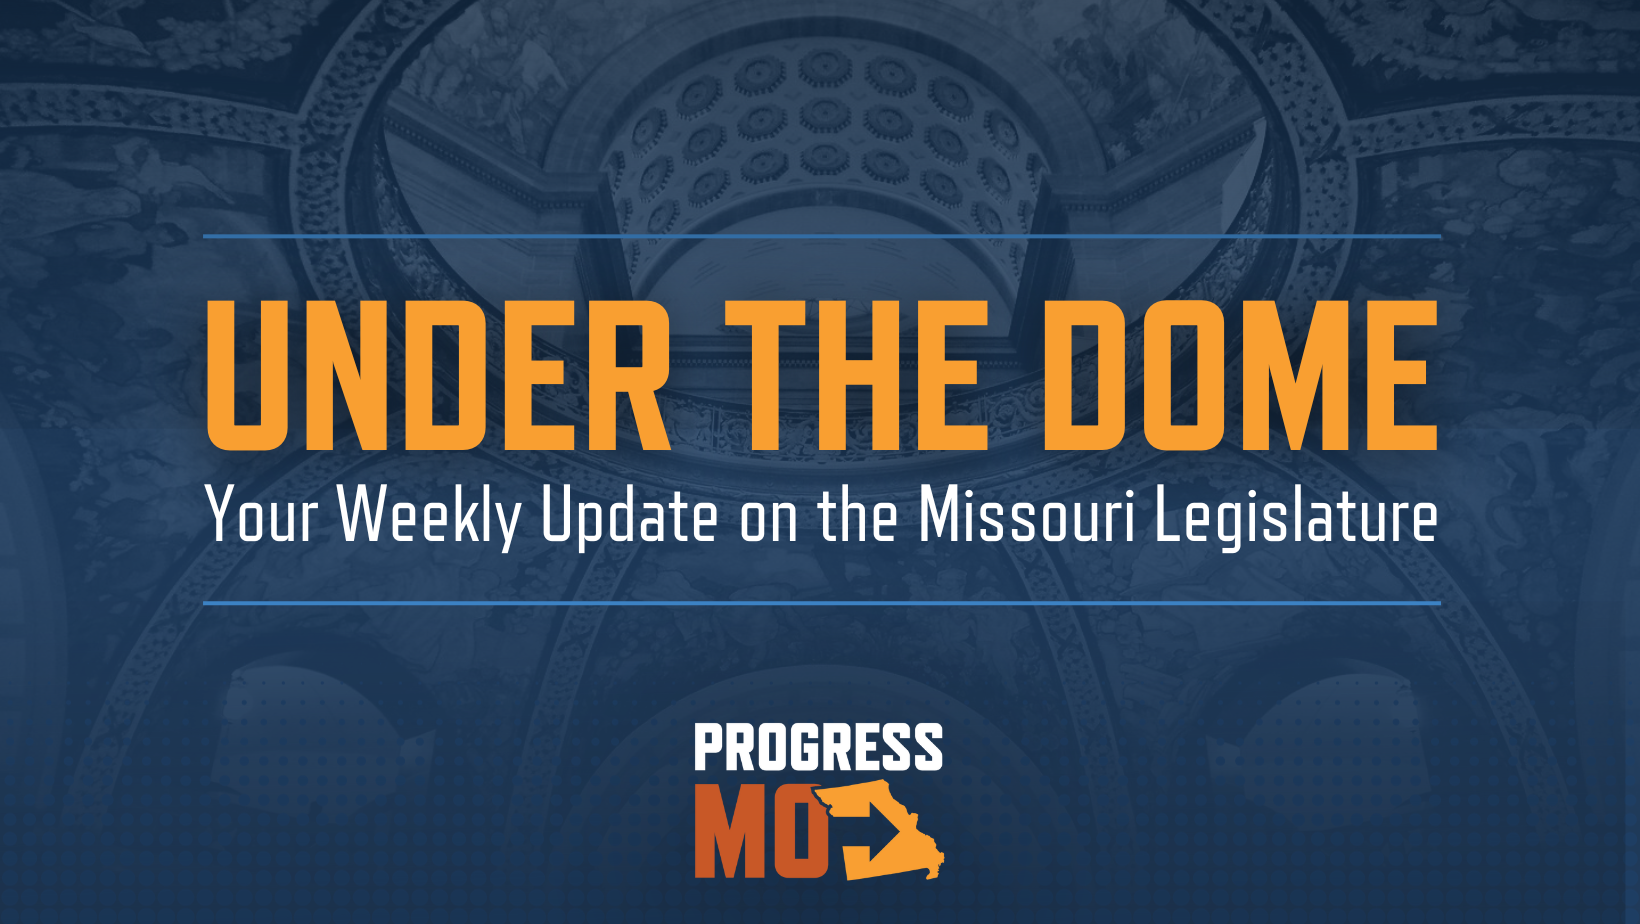 Under the Dome graphic with Missouri State Capitol Dome in background